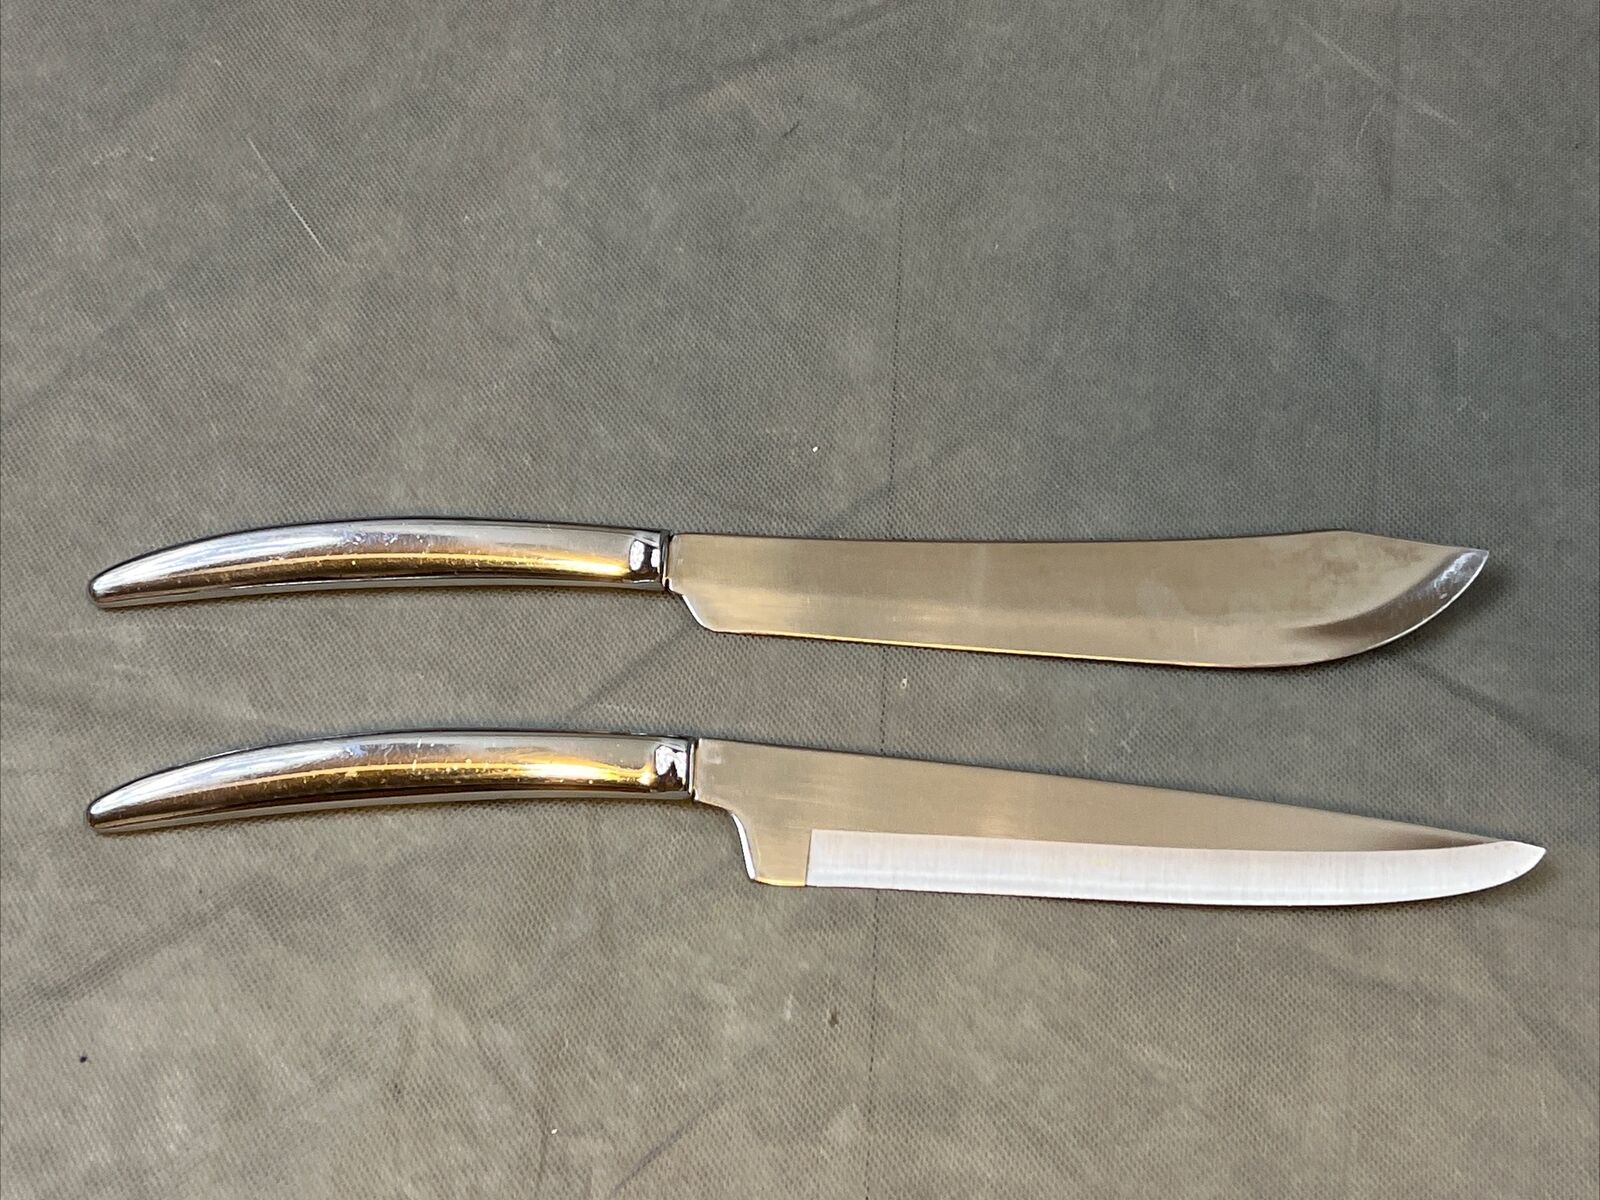 VINTAGE SET OF 2 SALADMASTER STAINLESS KNIVES # 403 & 405 MADE IN USA 